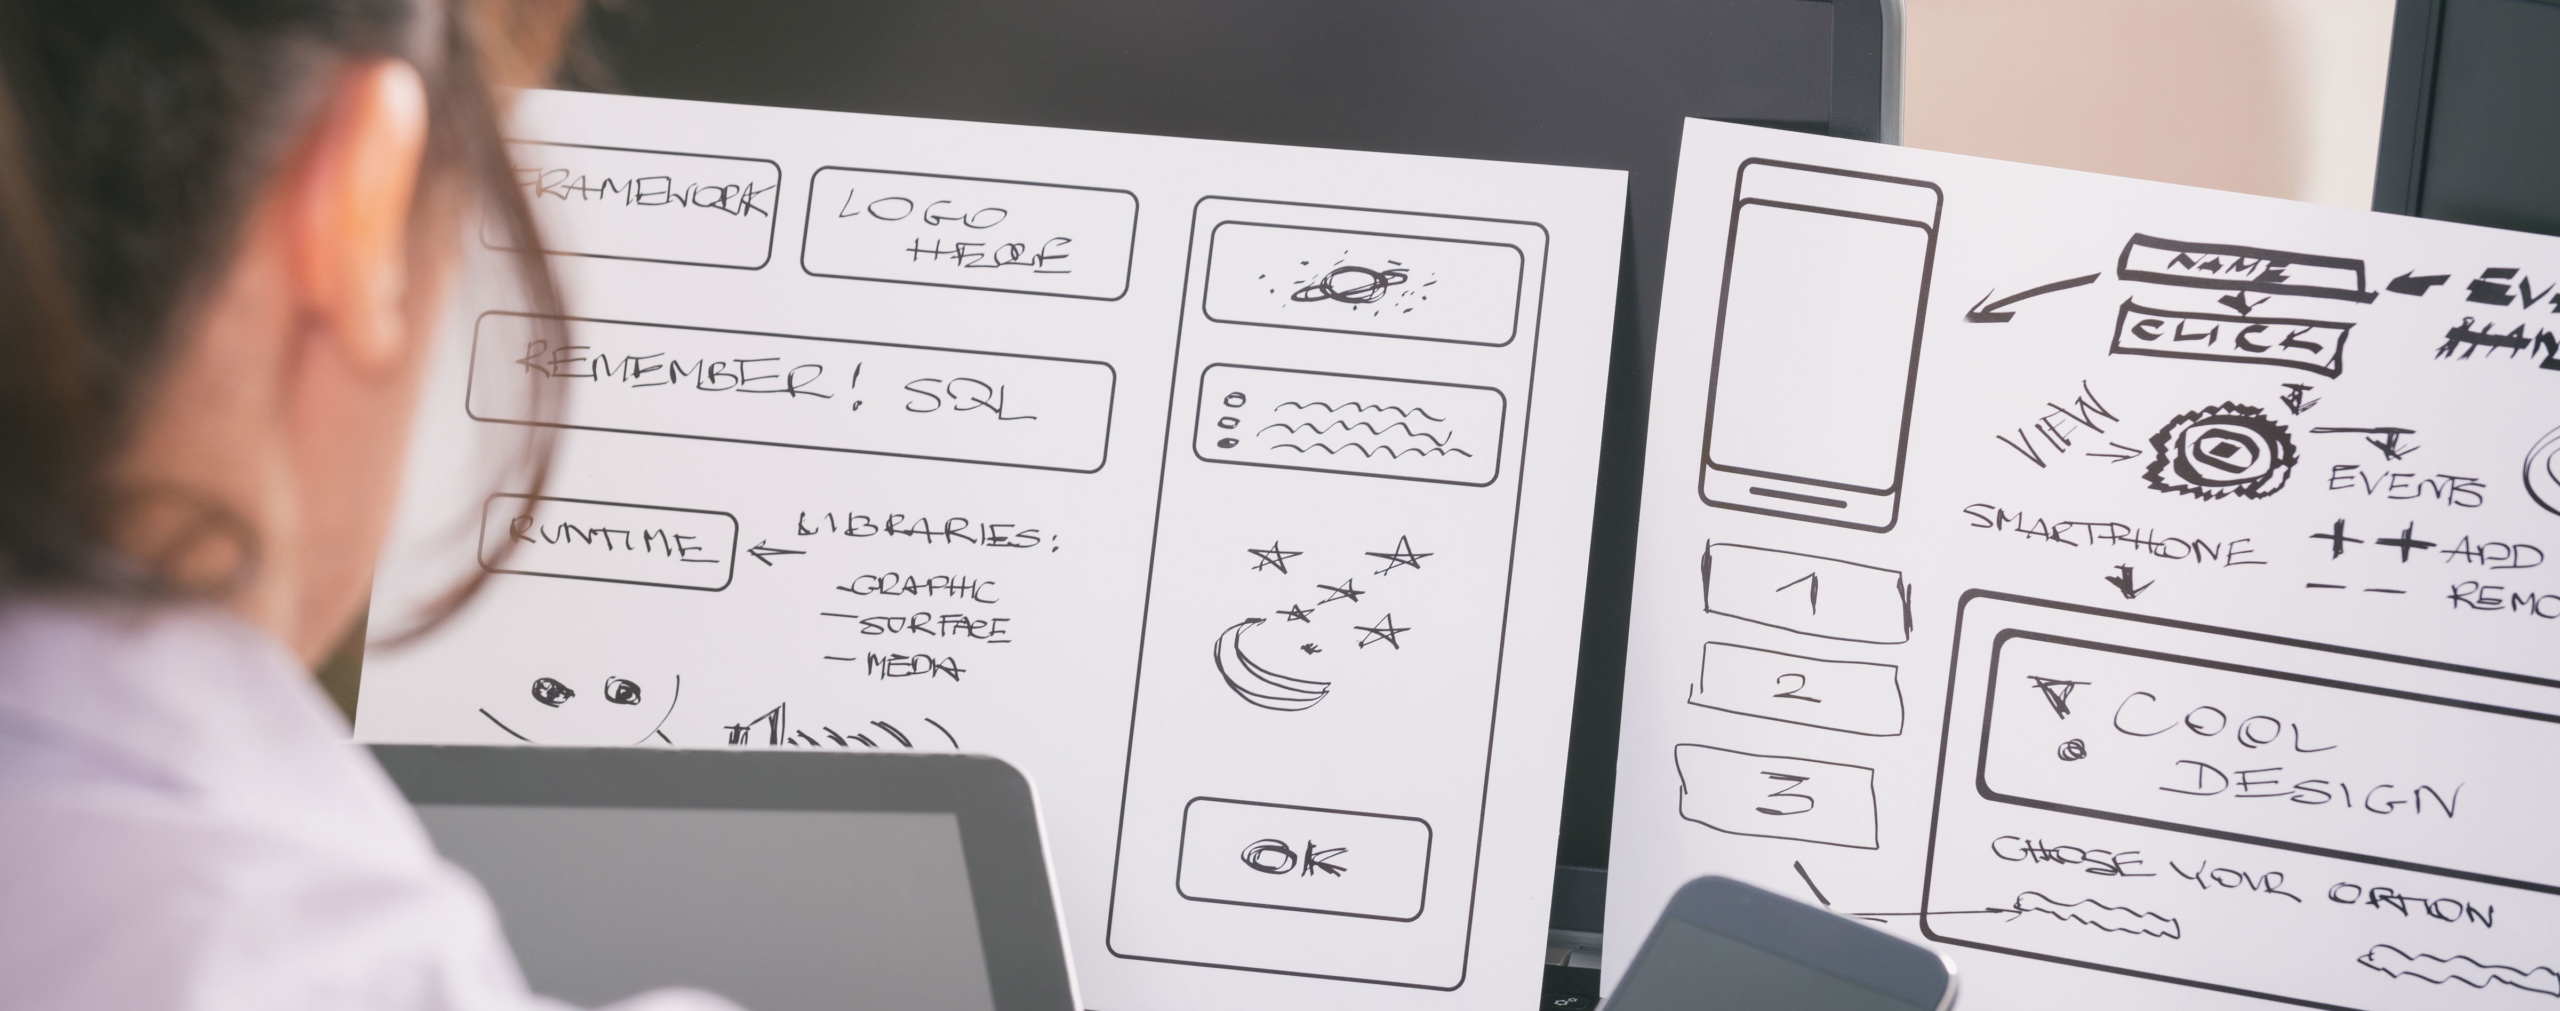 Hand-drawn wireframes of initial sketches of a user interface design. The wireframes show layout, structure, and basic elements of an interface.